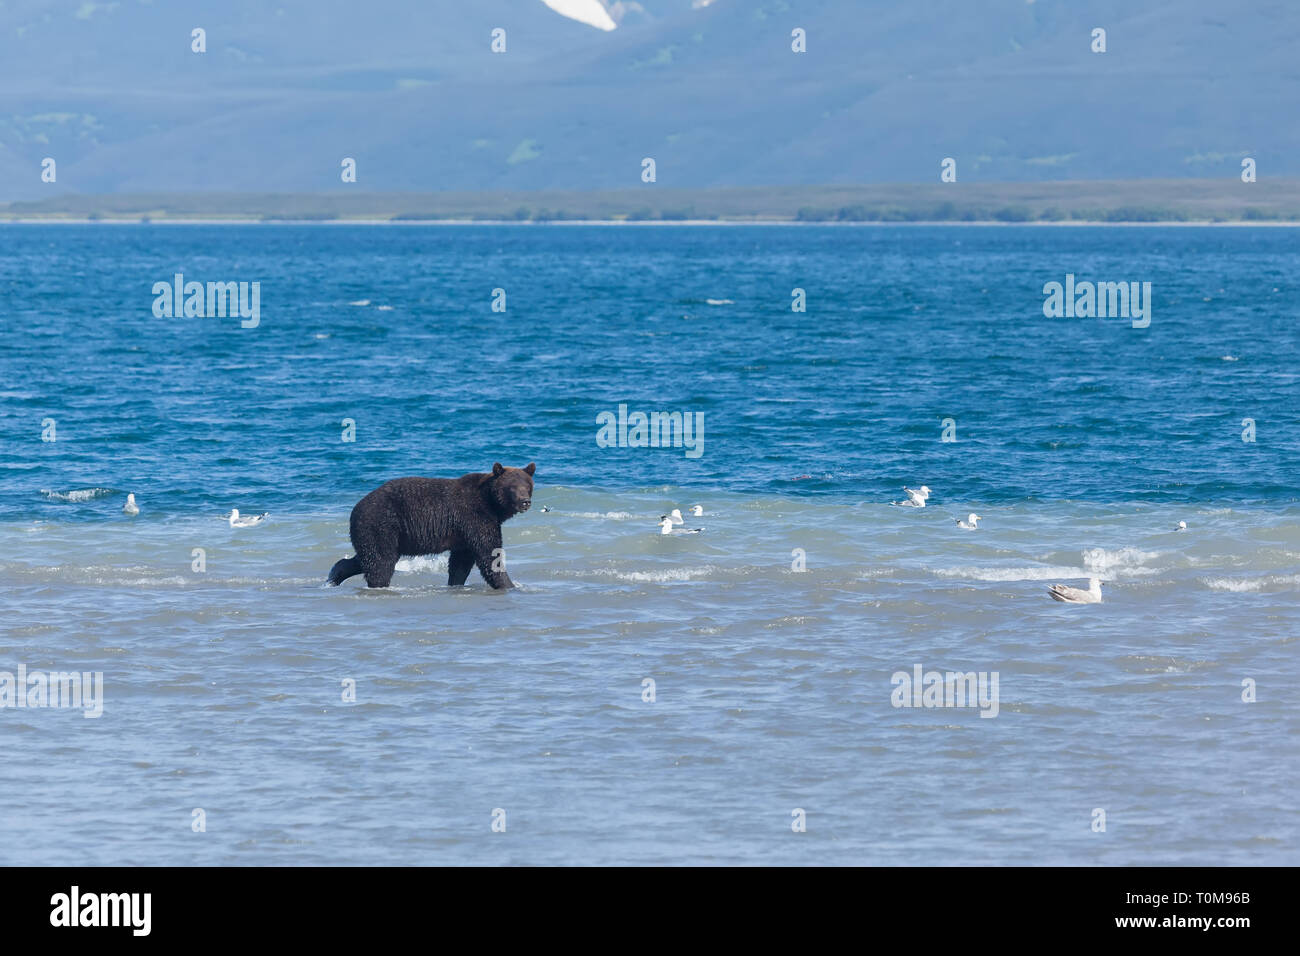 Brown bear grizzly crosses a river. Profile view. Kamchatka landscape. Russia. Stock Photo